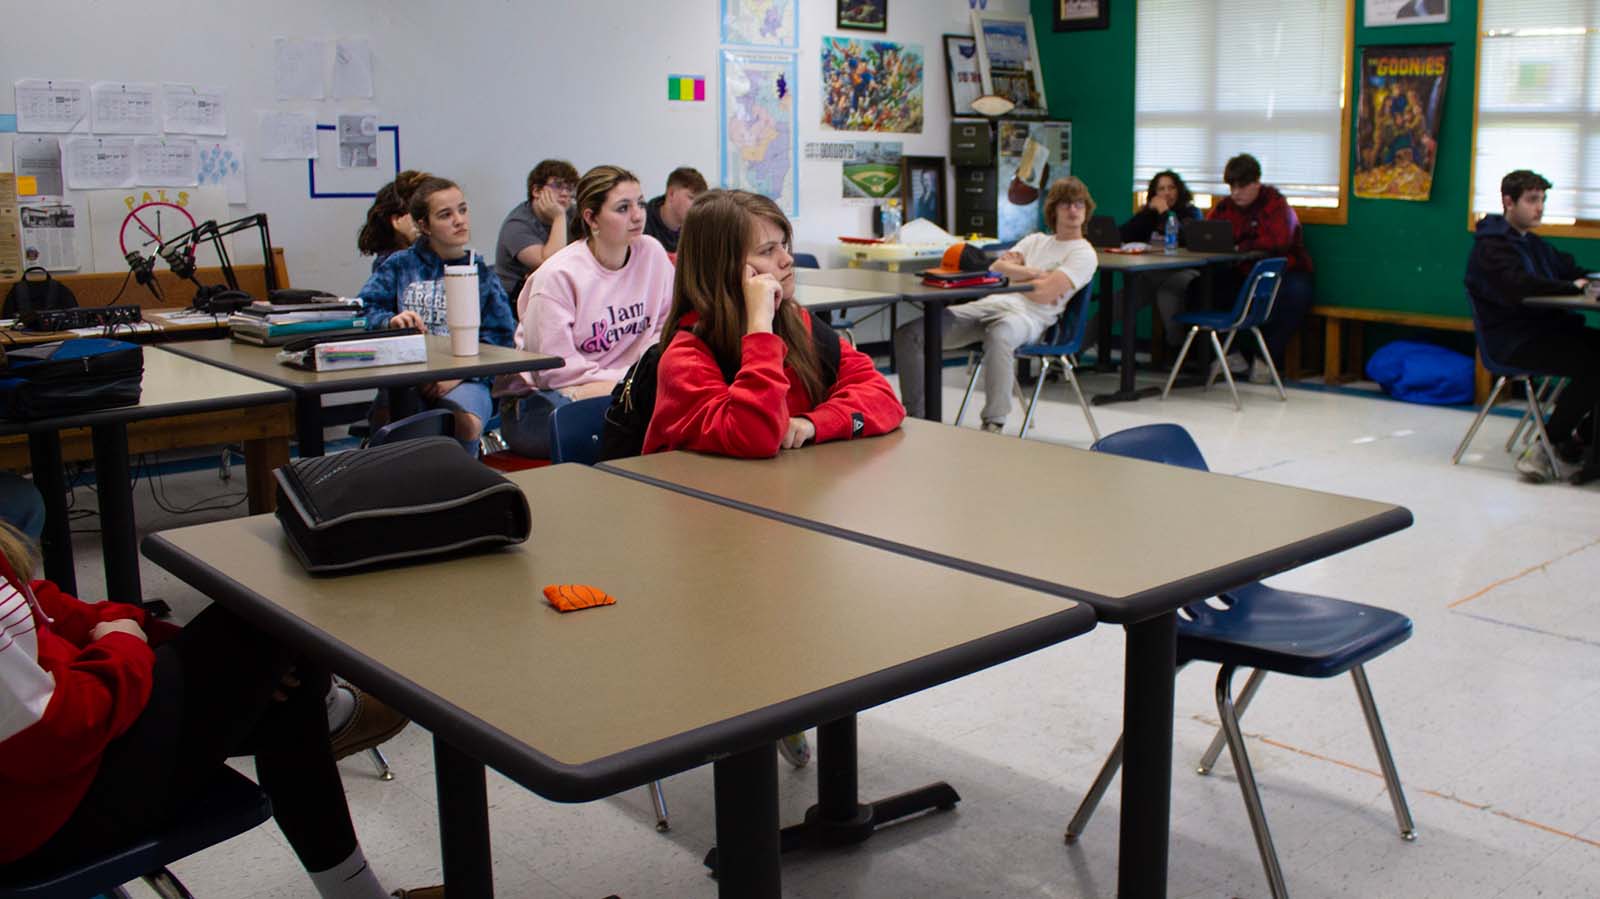 Eleven students sit around tables in a classroom with one green wall and one white wall. There are posters, maps and printed sheets on the walls, and there is podcasting equipment in one back corner. The student in the foreground has long, light brown hair and a big red hoodie.